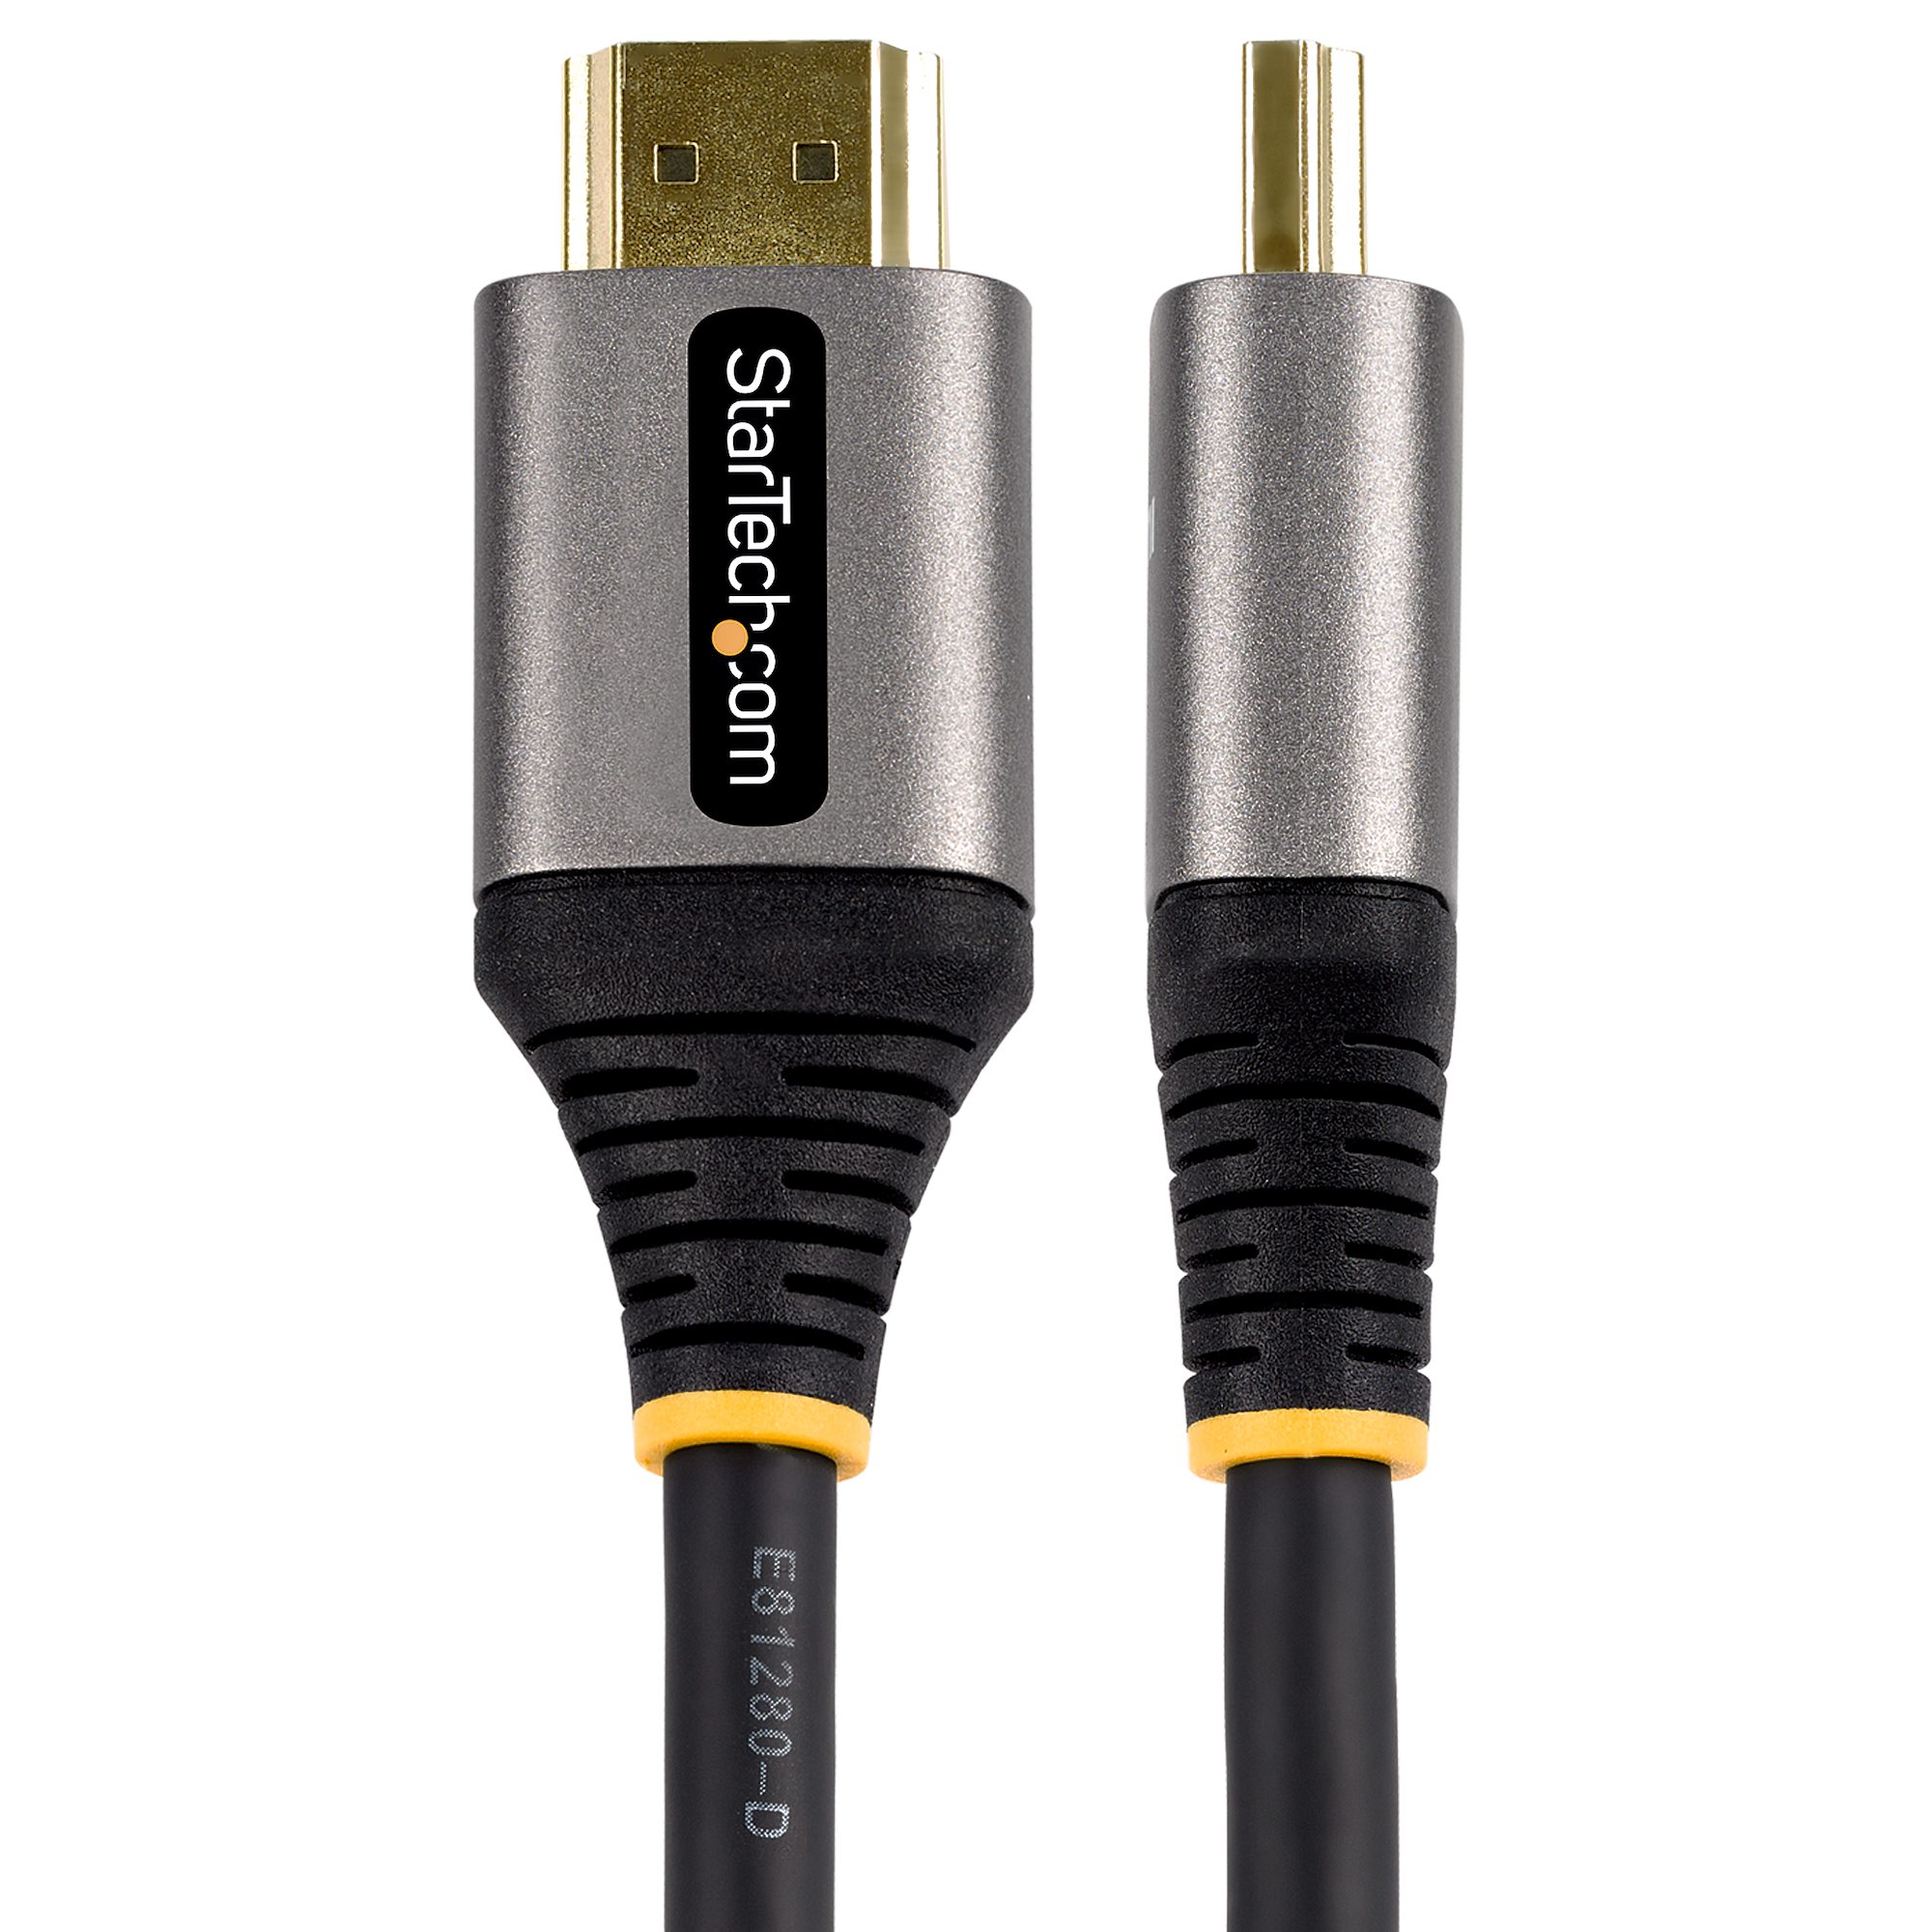  StarTech.com 5m High Speed HDMI Cable – Ultra HD 4k x 2k HDMI  Cable – HDMI to HDMI M/M - 5 meter HDMI 1.4 Cable - Audio/Video Gold-Plated  (HDMM5M),Black : Electronics